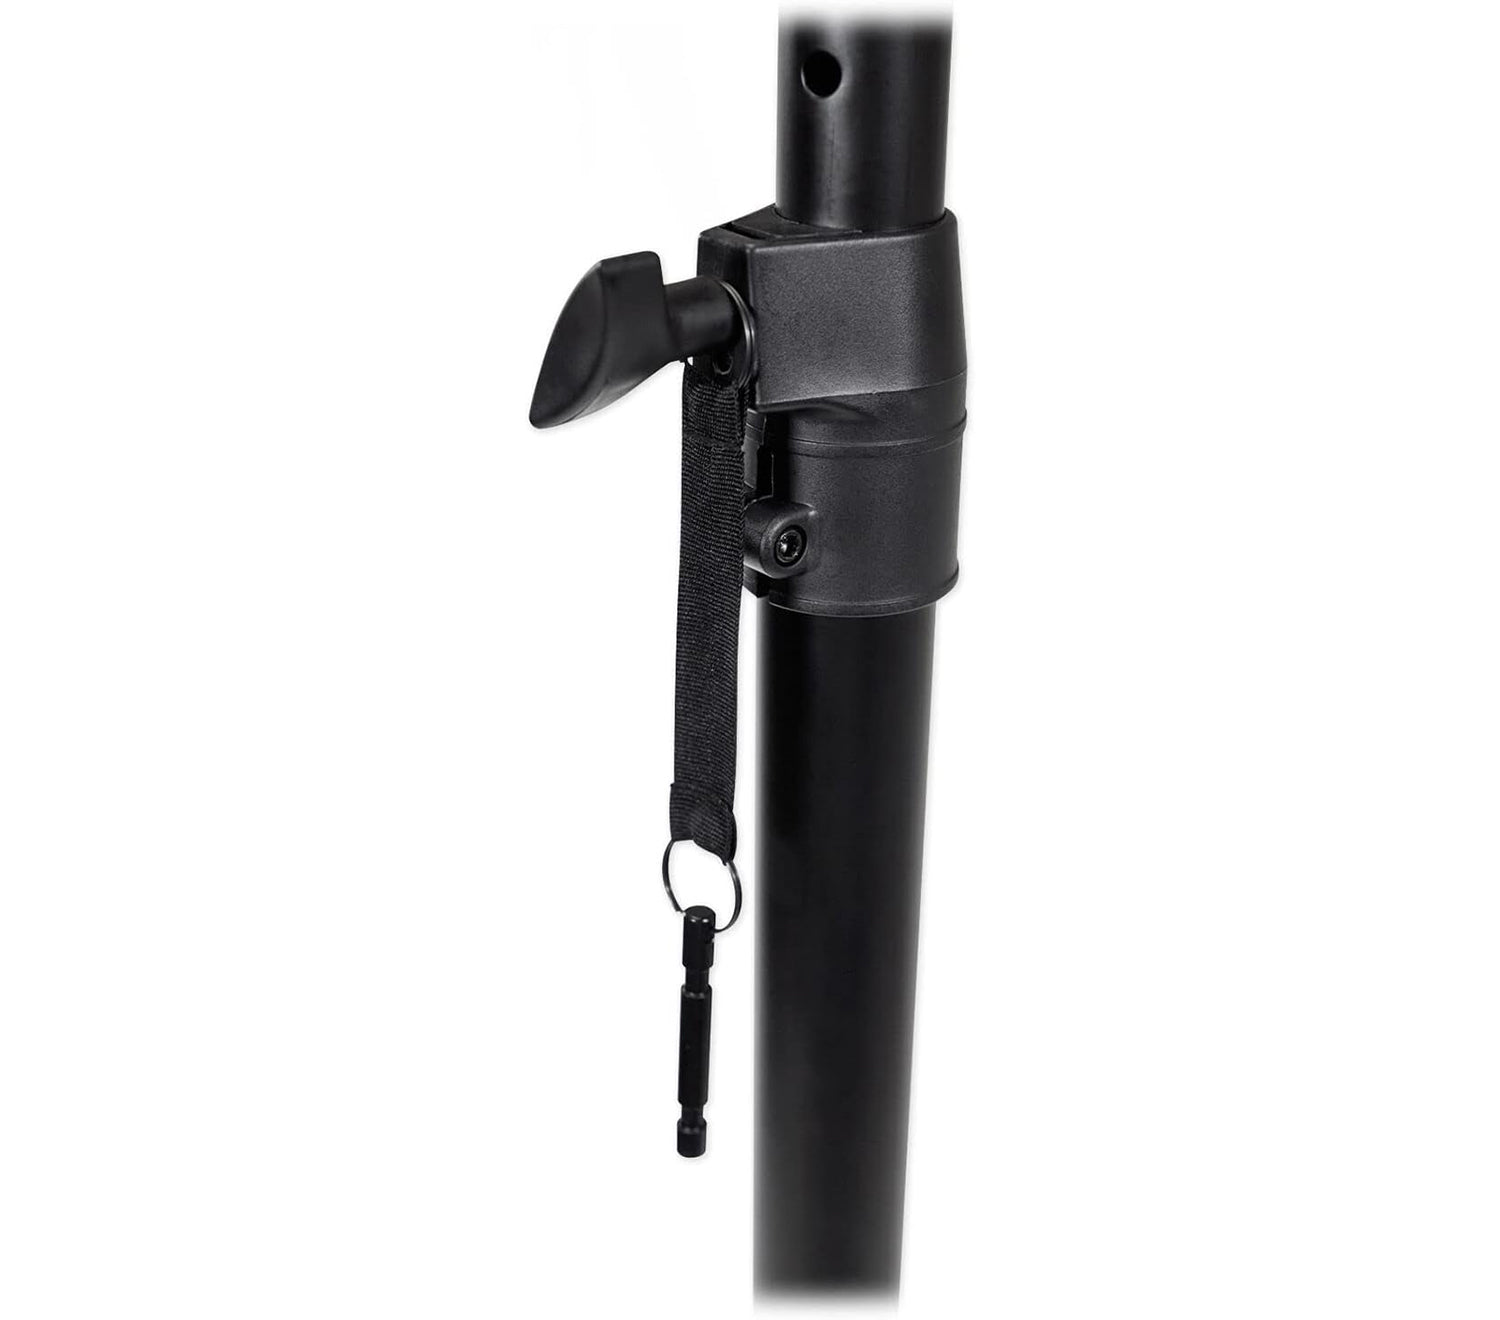 B-Stock: Mackie SPM400 Adjustable Speaker Pole for DRM Series Subwoofers by Mackie